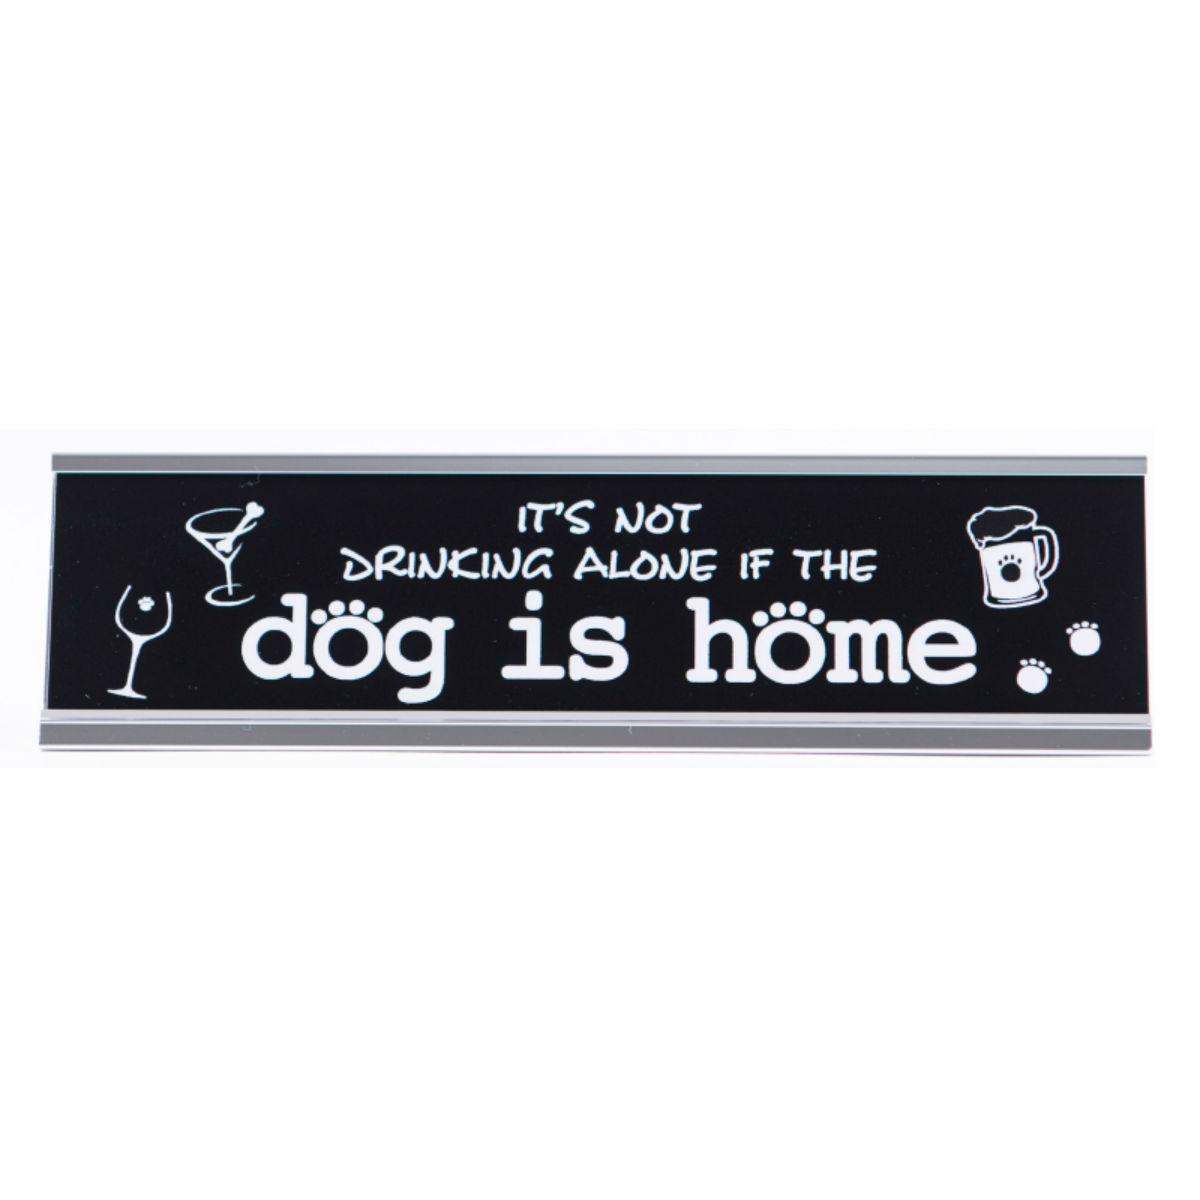 Dog Speak Desk Sign - It's Not Drinking Alone If The Dog Is Home